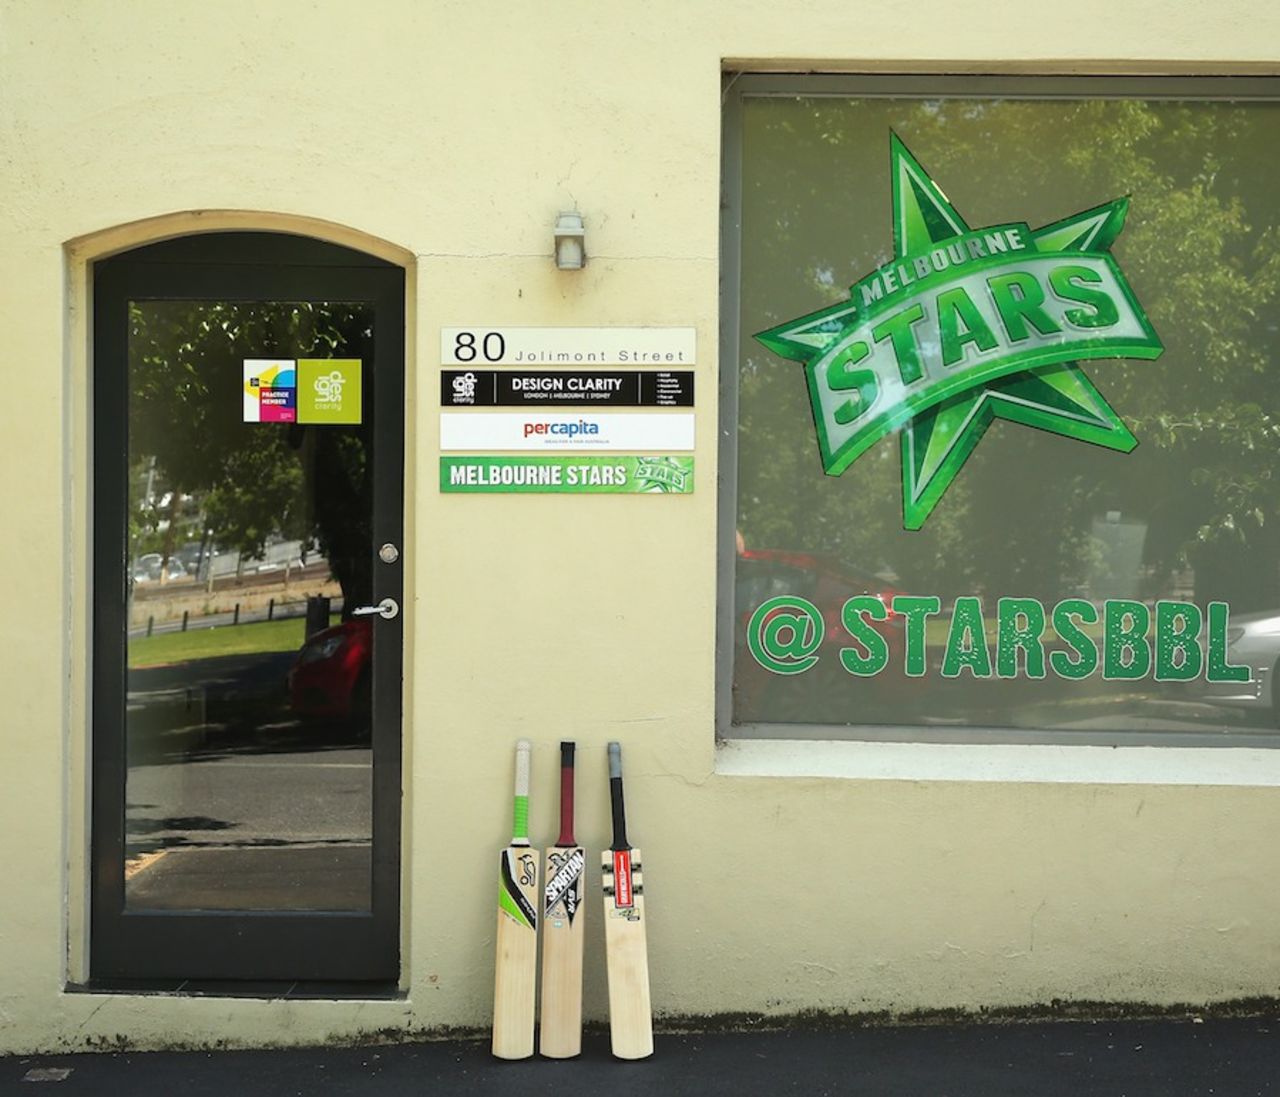 Bats placed outside the Melbourne Stars office in tribute to Phillip Hughes, November 28, 2014